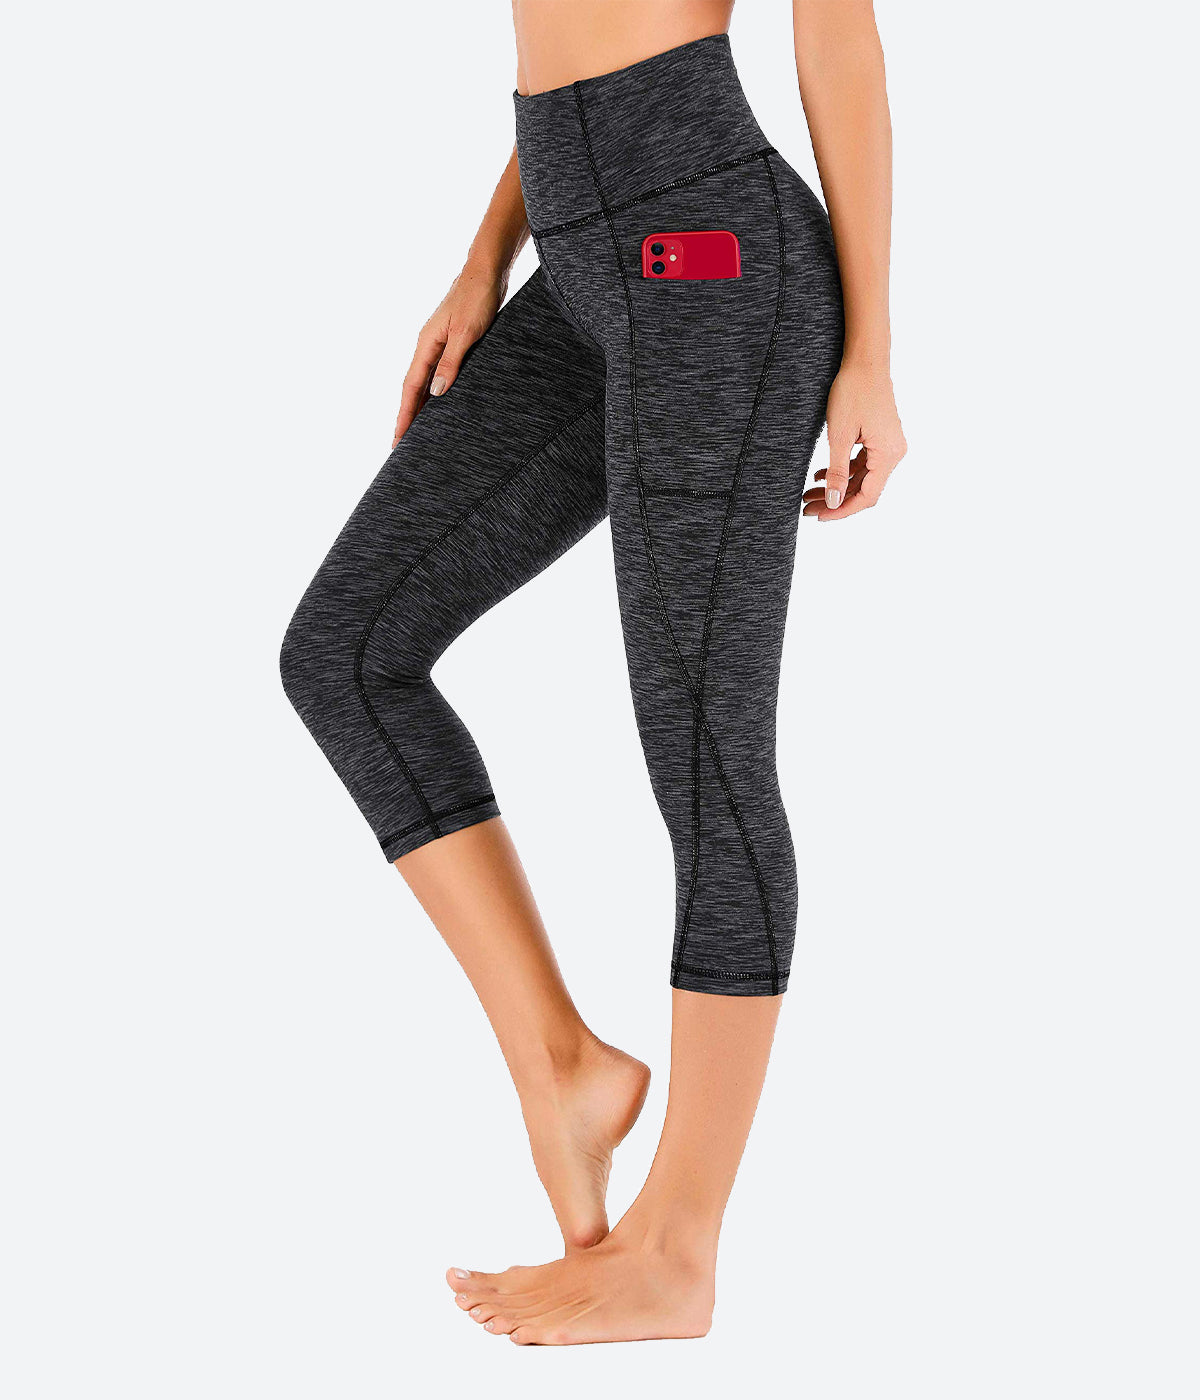 Women's Athletic Crop Leggings with Pockets